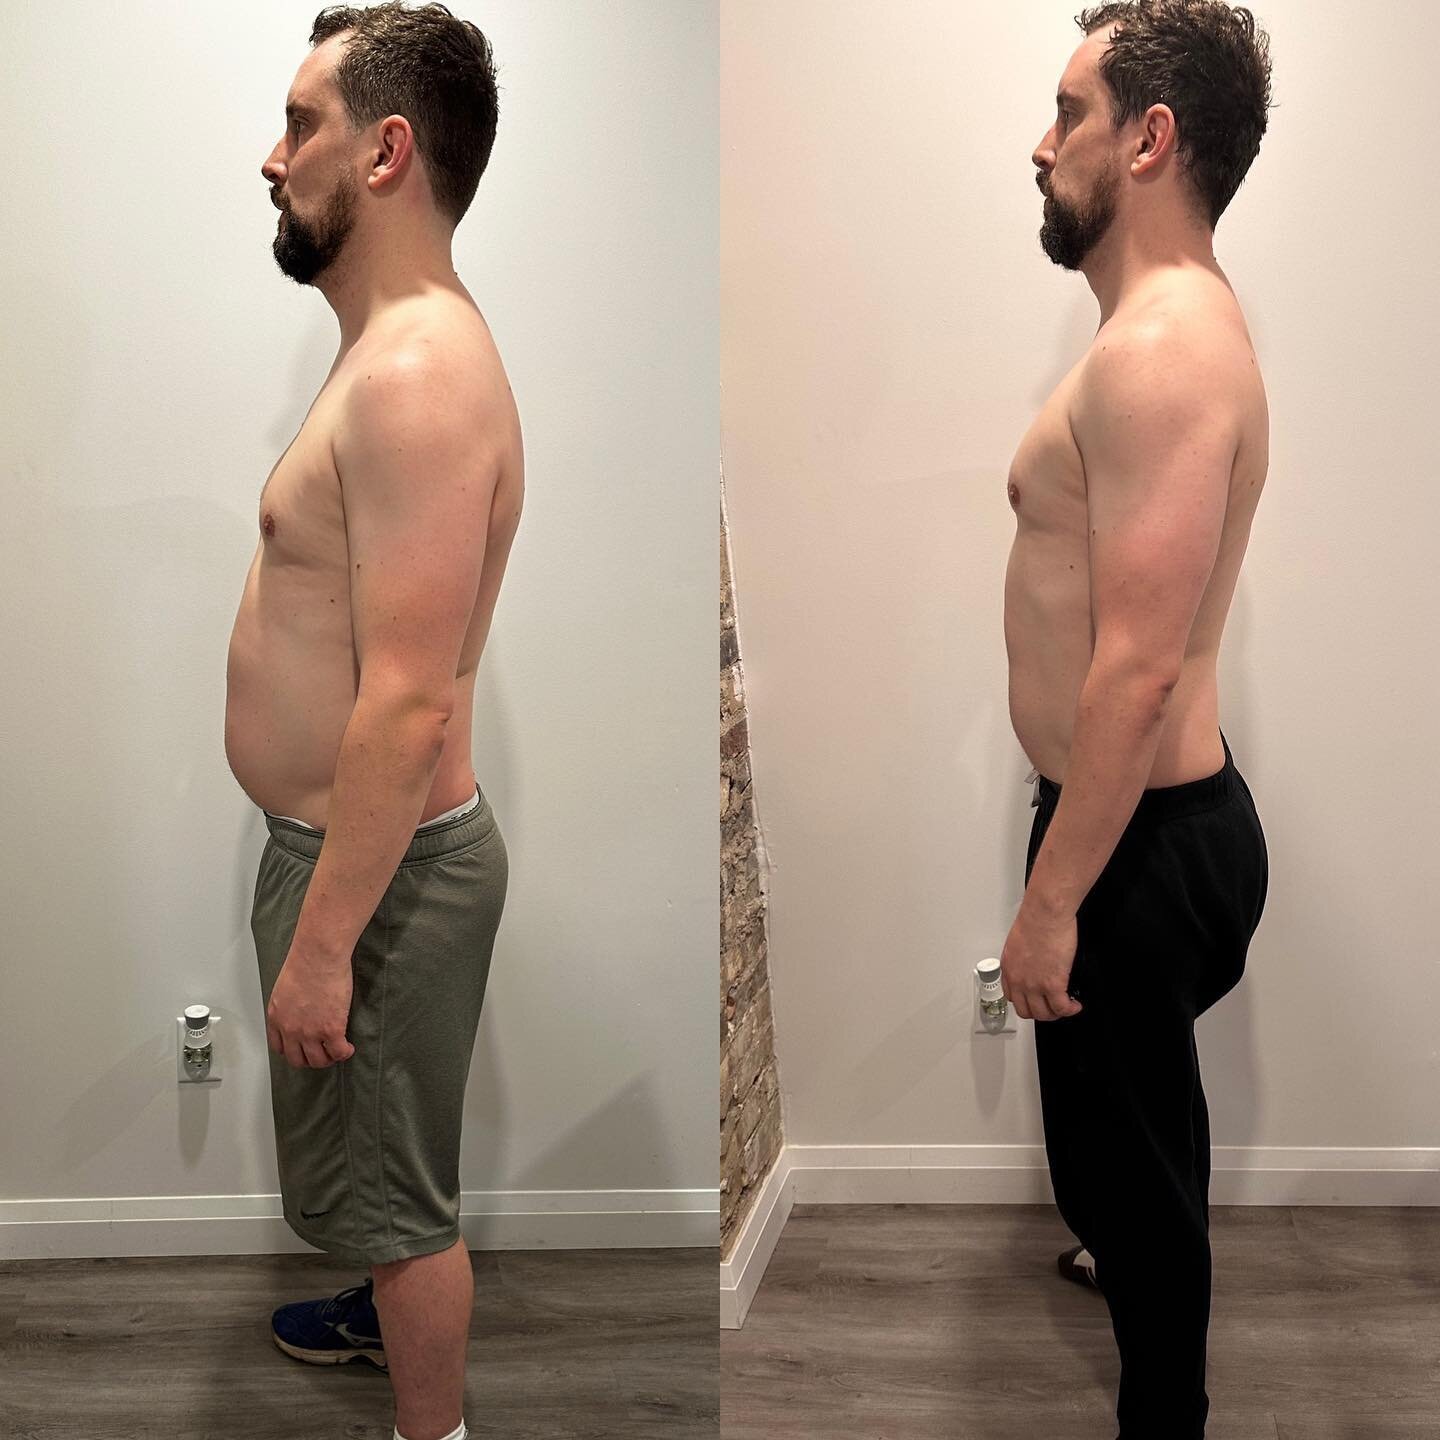 ♨️30 day progress♨️

⬆️Muscle mass
⬆️Posture 
⬆️Chest definition
⬆️Energy &amp; strength
⬇️Abdominal fat &amp; overall body fat 

Shoutout to my client Martin for his progress so far. We keep pushing! 
Let&rsquo;s goooooo🙌

@martinanddagger 

#onemo